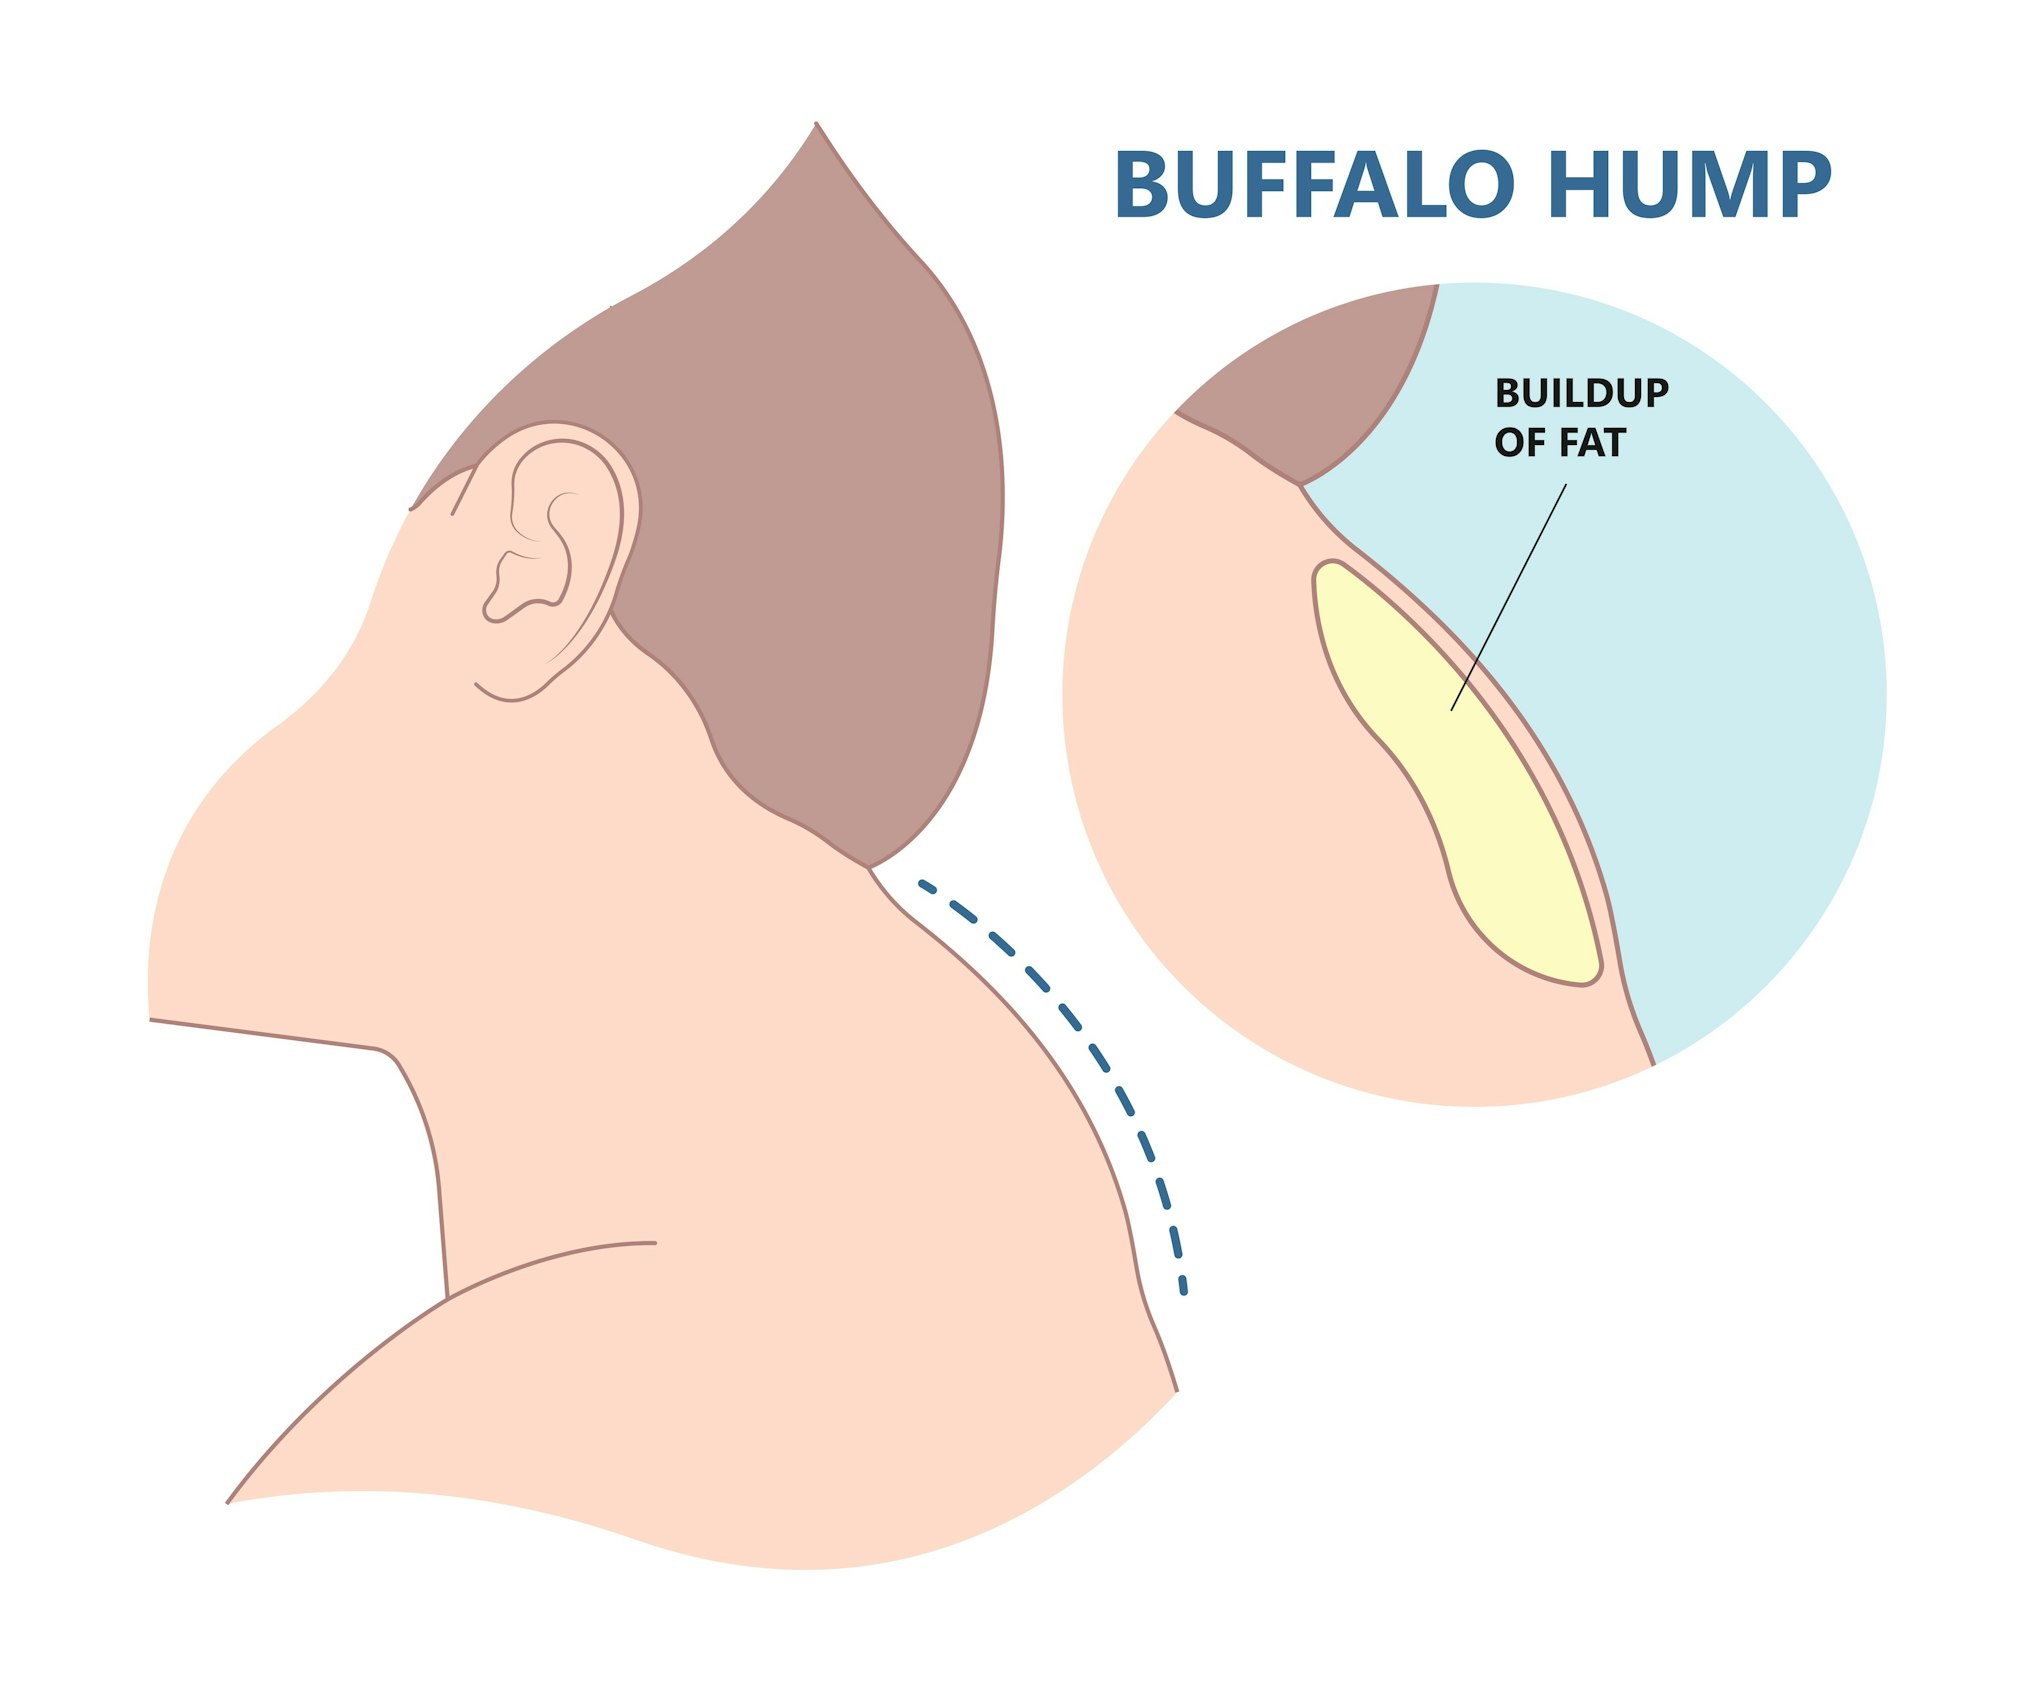 buffalo dowager's hump head bad poor women spine pad excess shape